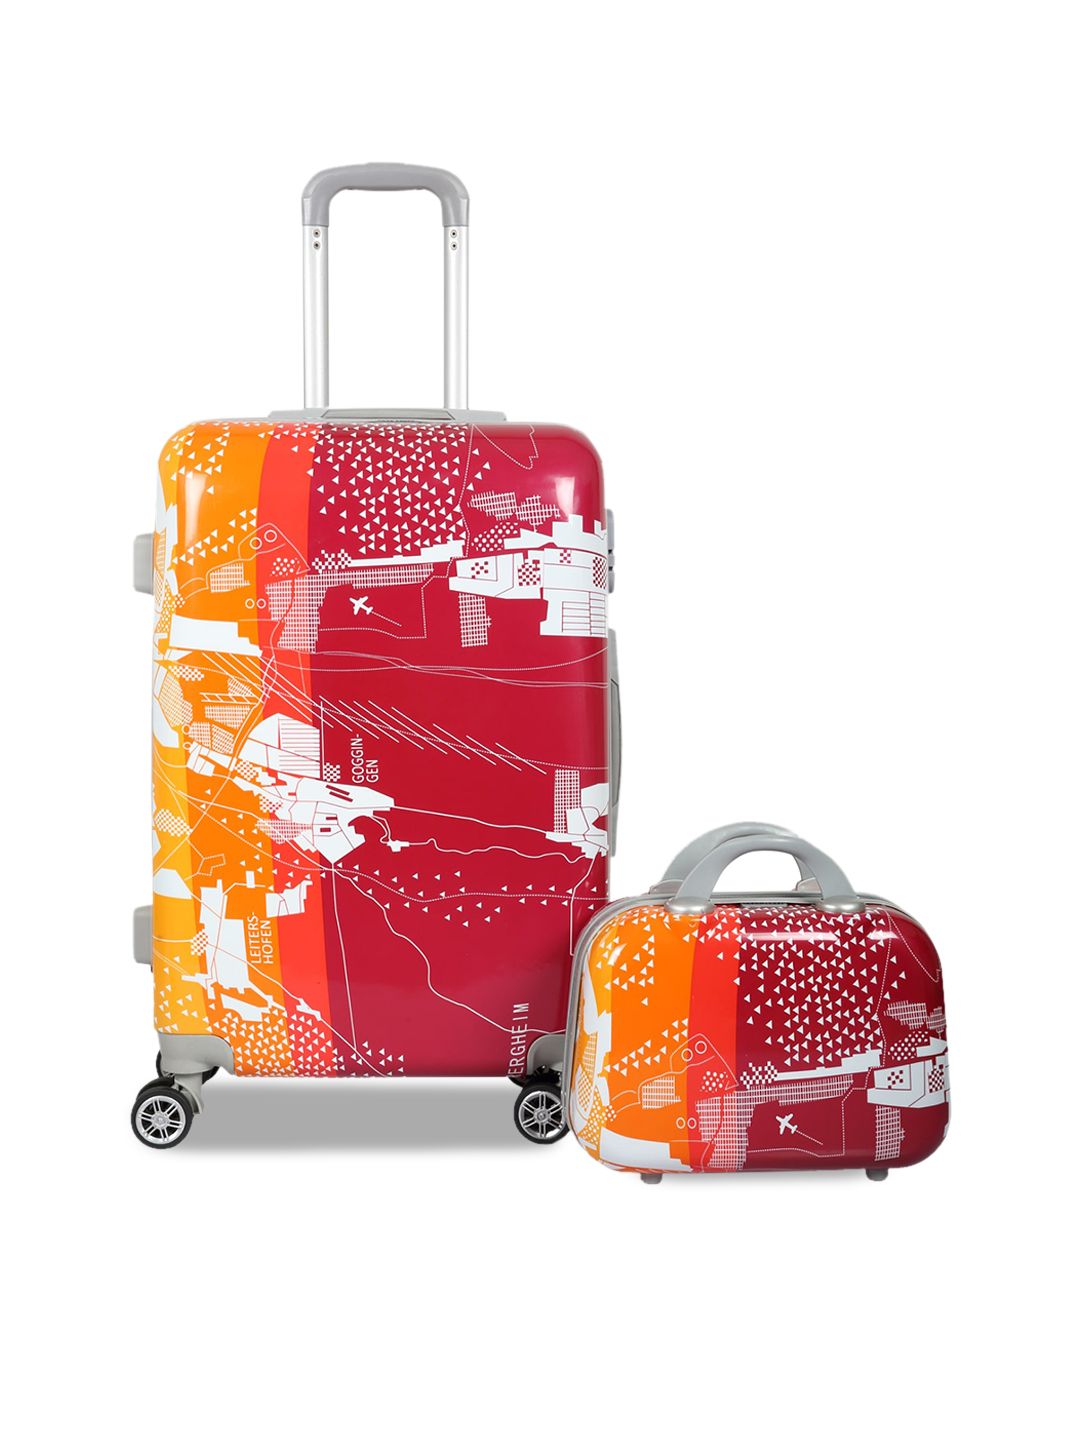 Polo Class Unisex Red Set of 2 Luggage Trolley Bag with 1pc Vanity Bag Price in India